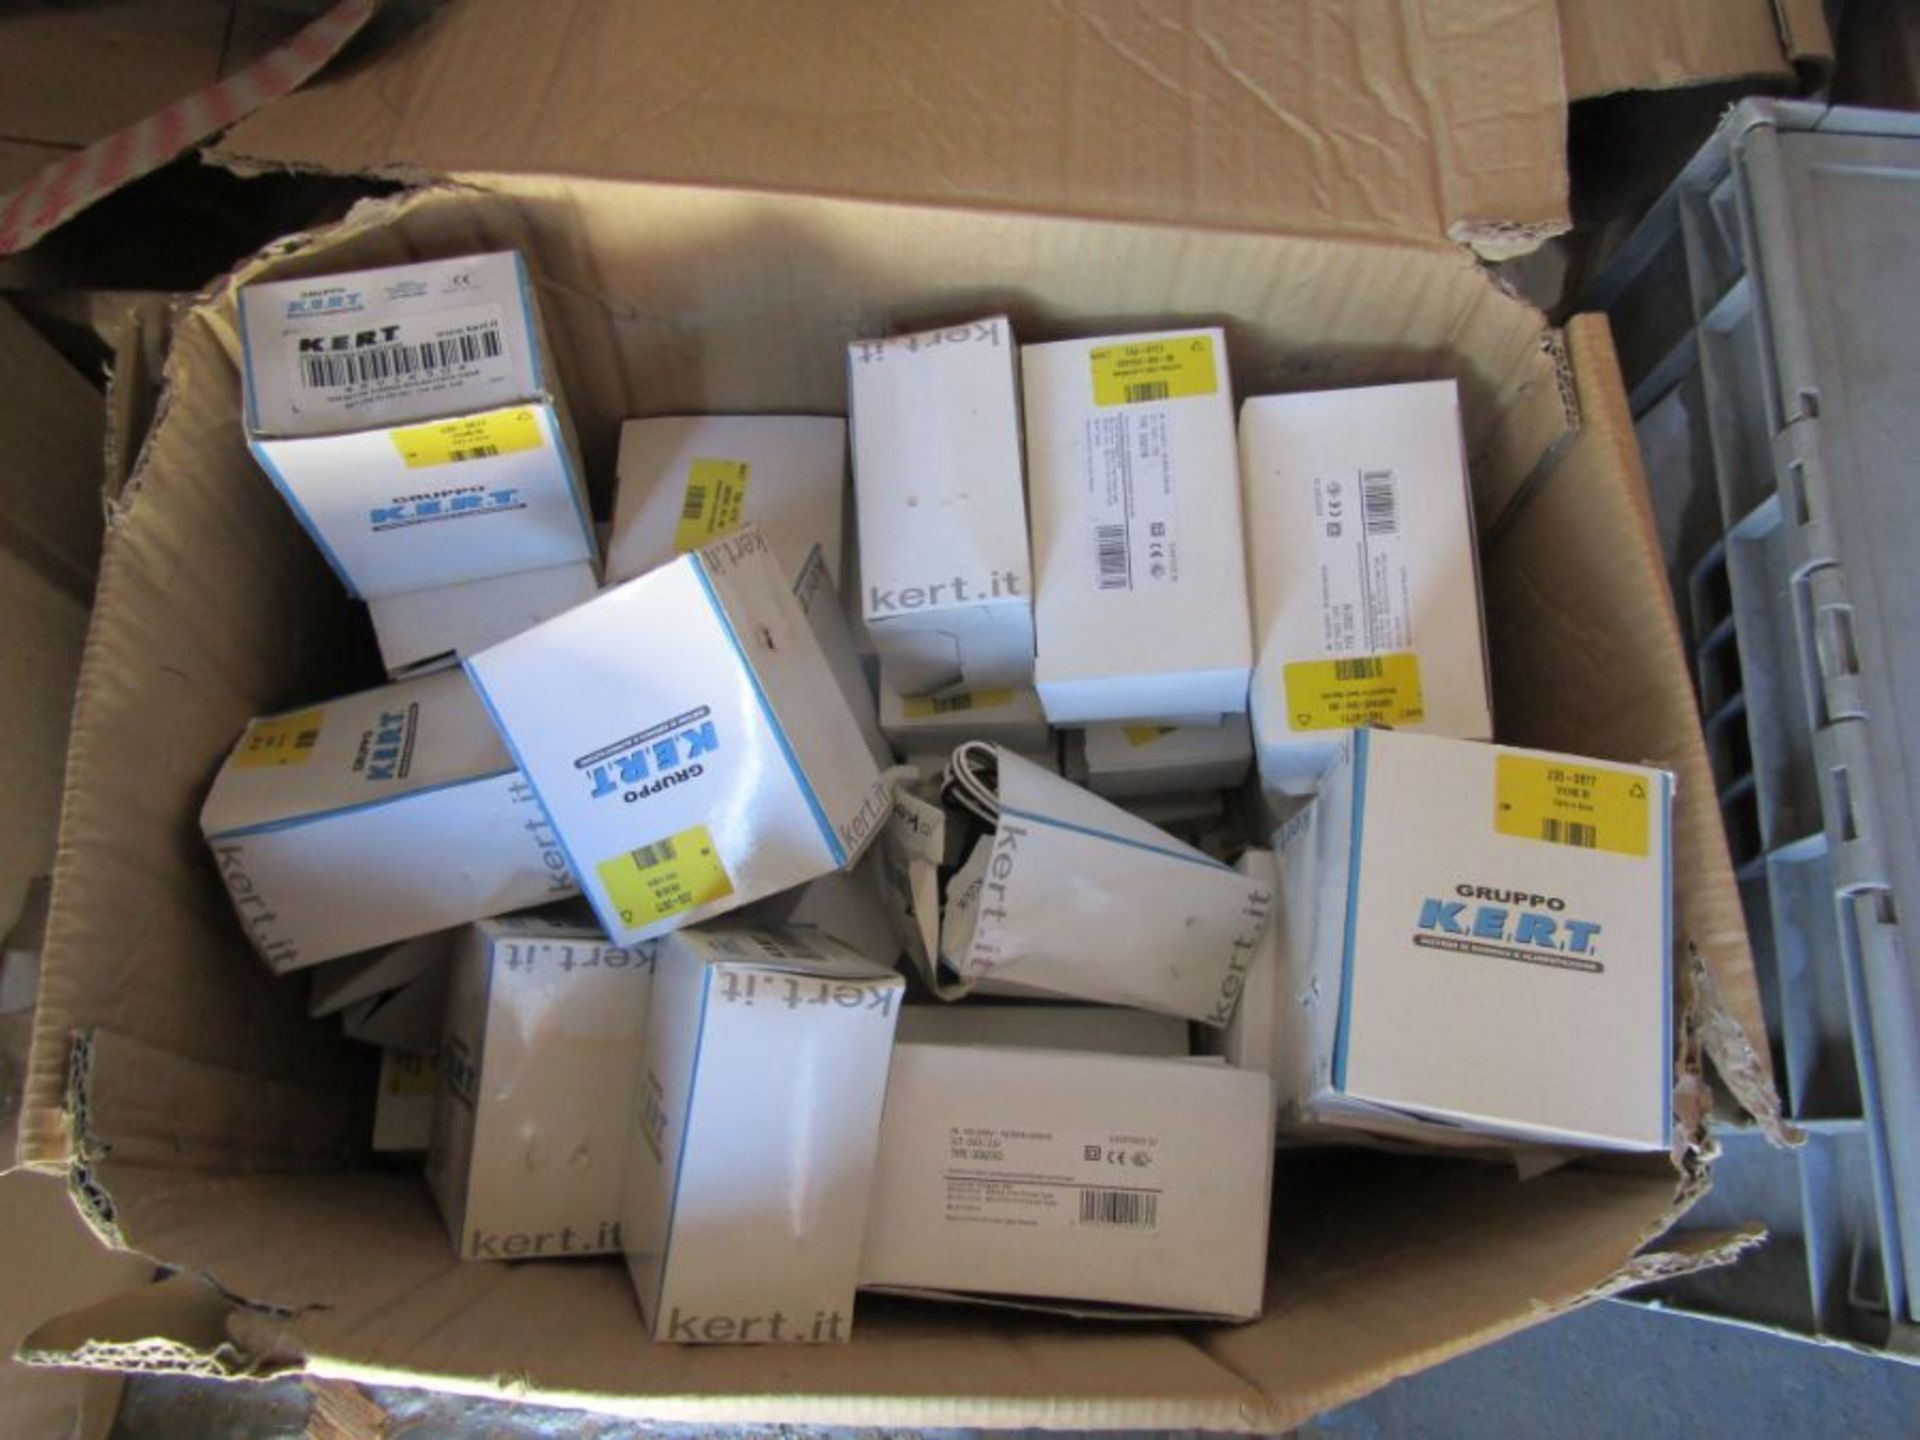 Box of around 40 Various Euro Plug Power Adaptors / Chargers - Egston and Gruppo K.E.R.T